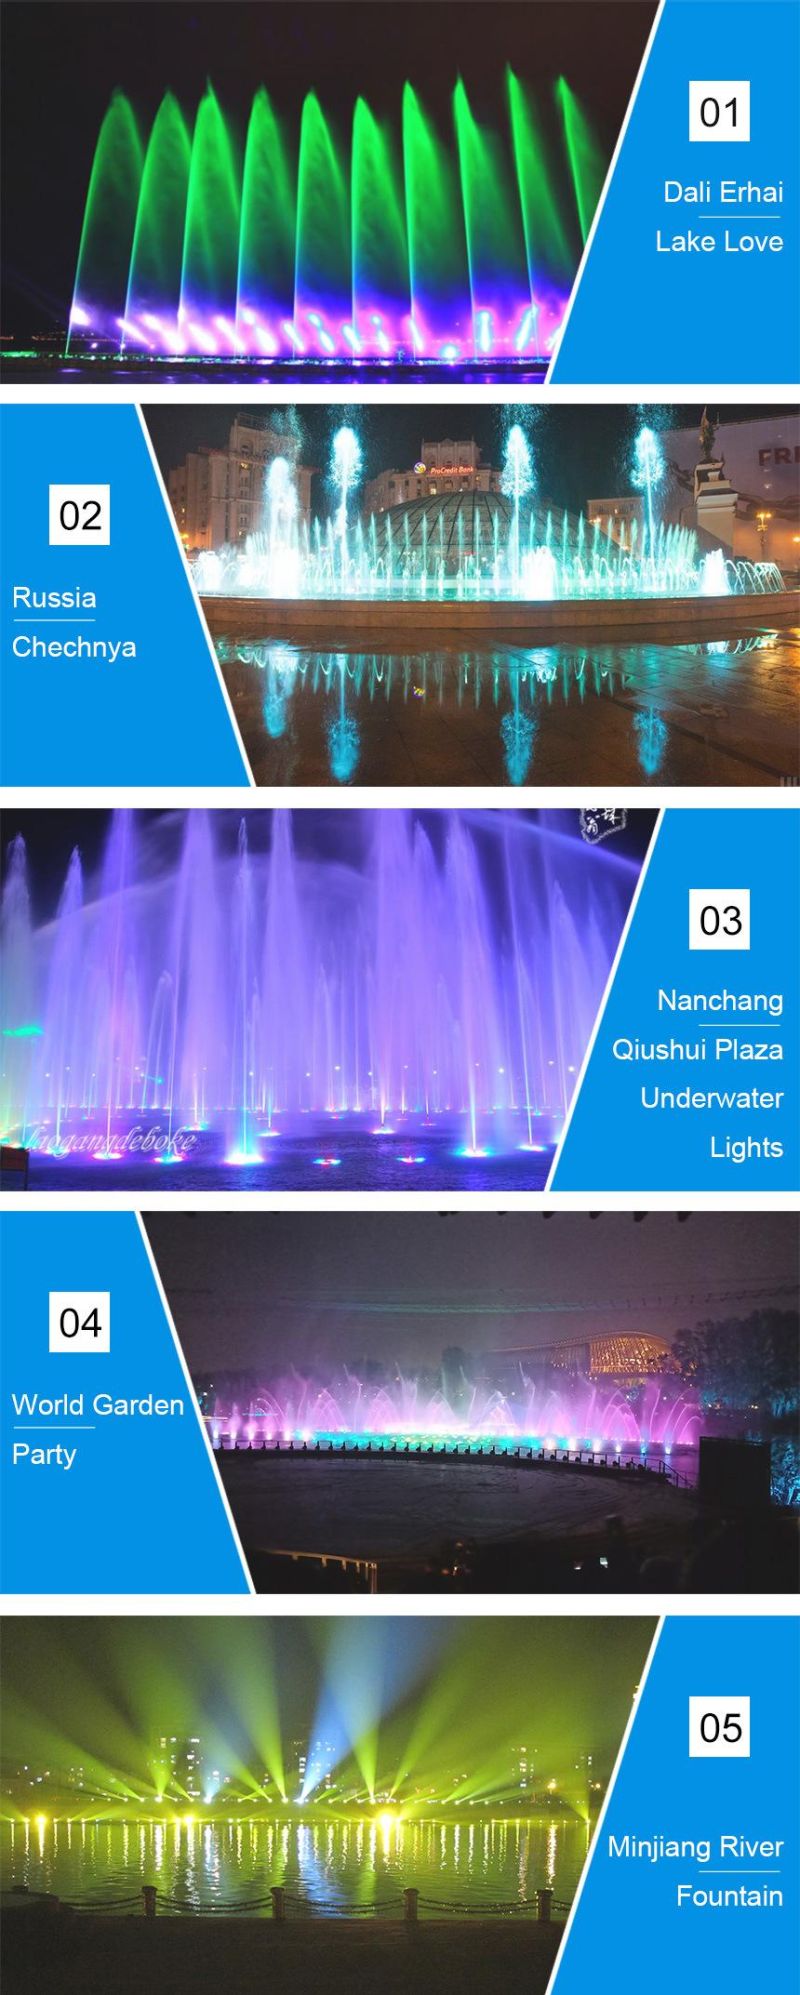 LED Underwater Light RGB 304 Stainless Steel Waterproof Grade IP68 Suitable for Swimming Pools, Fountains